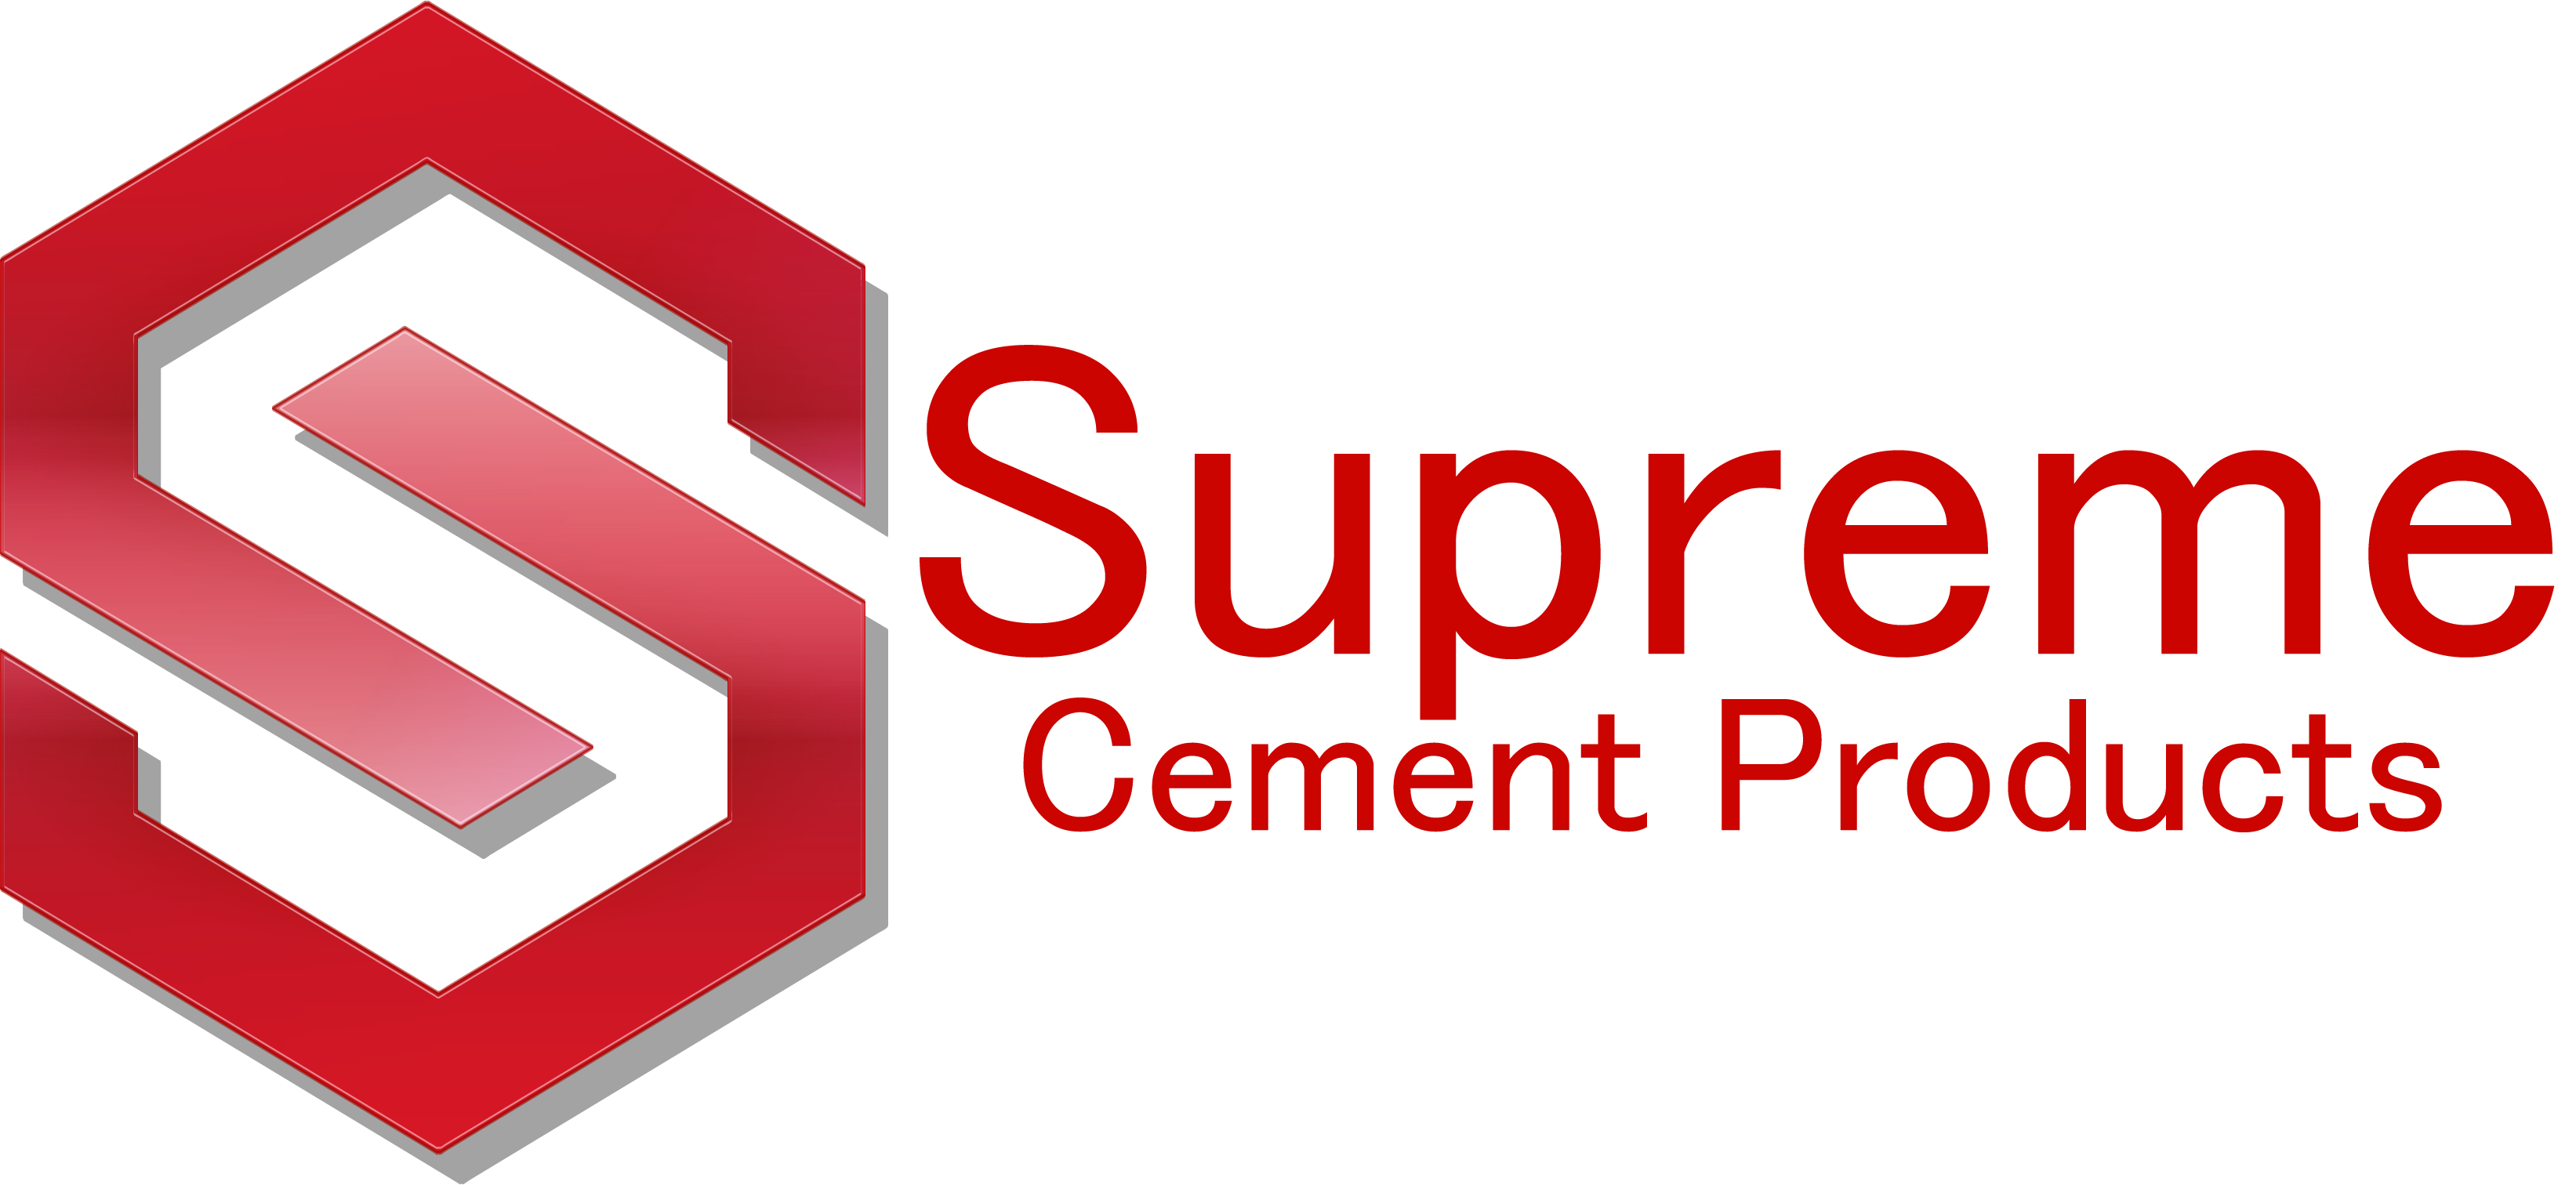 Supreme Cement Products